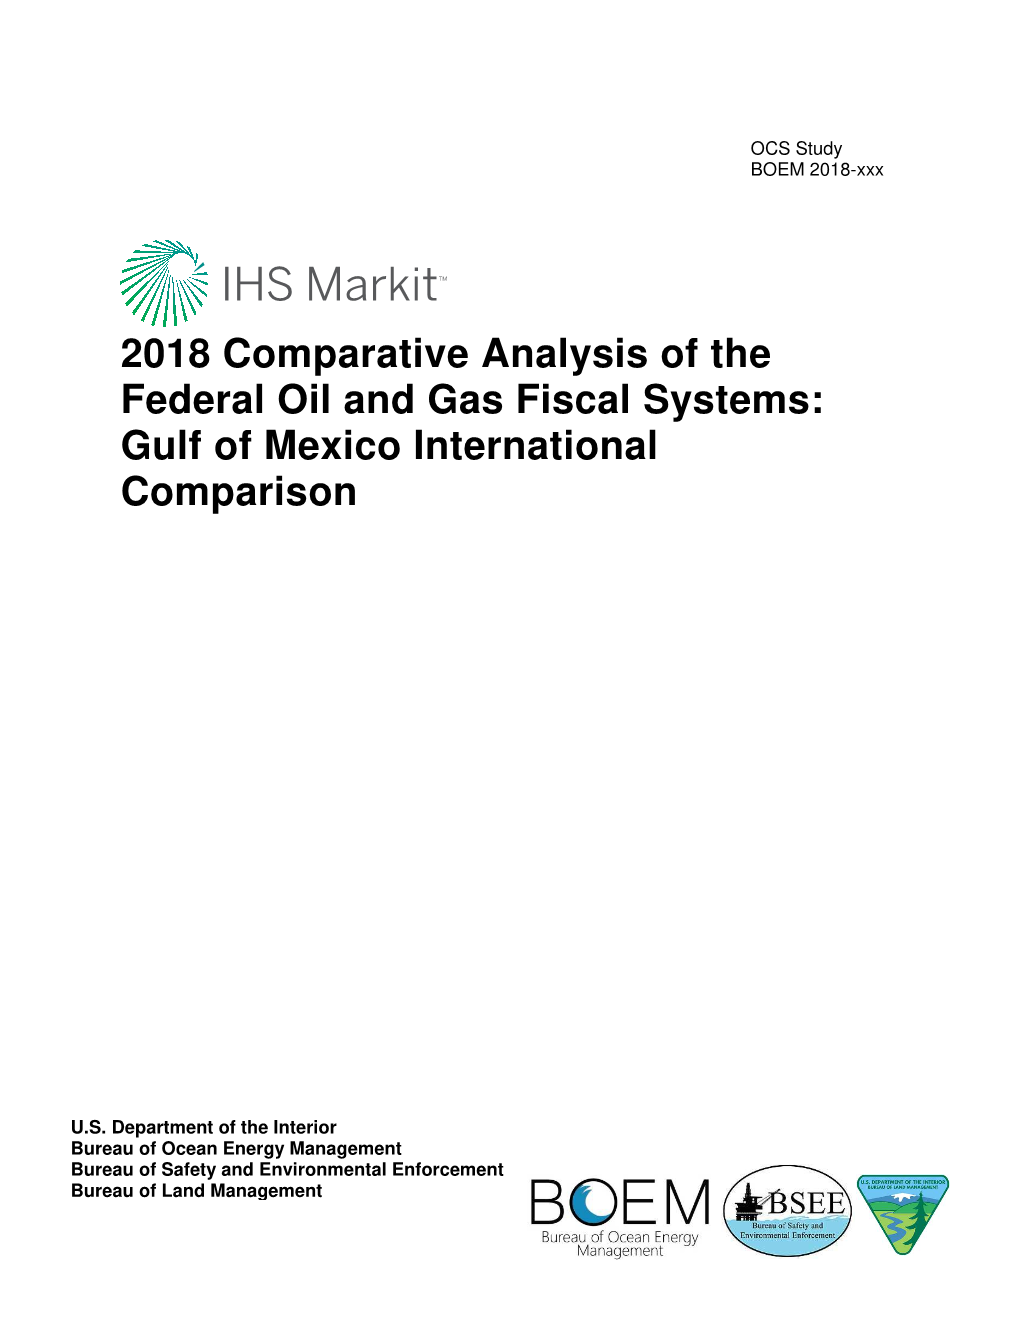 2018 Comparative Analysis of the Federal Oil and Gas Fiscal Systems: Gulf of Mexico International Comparison